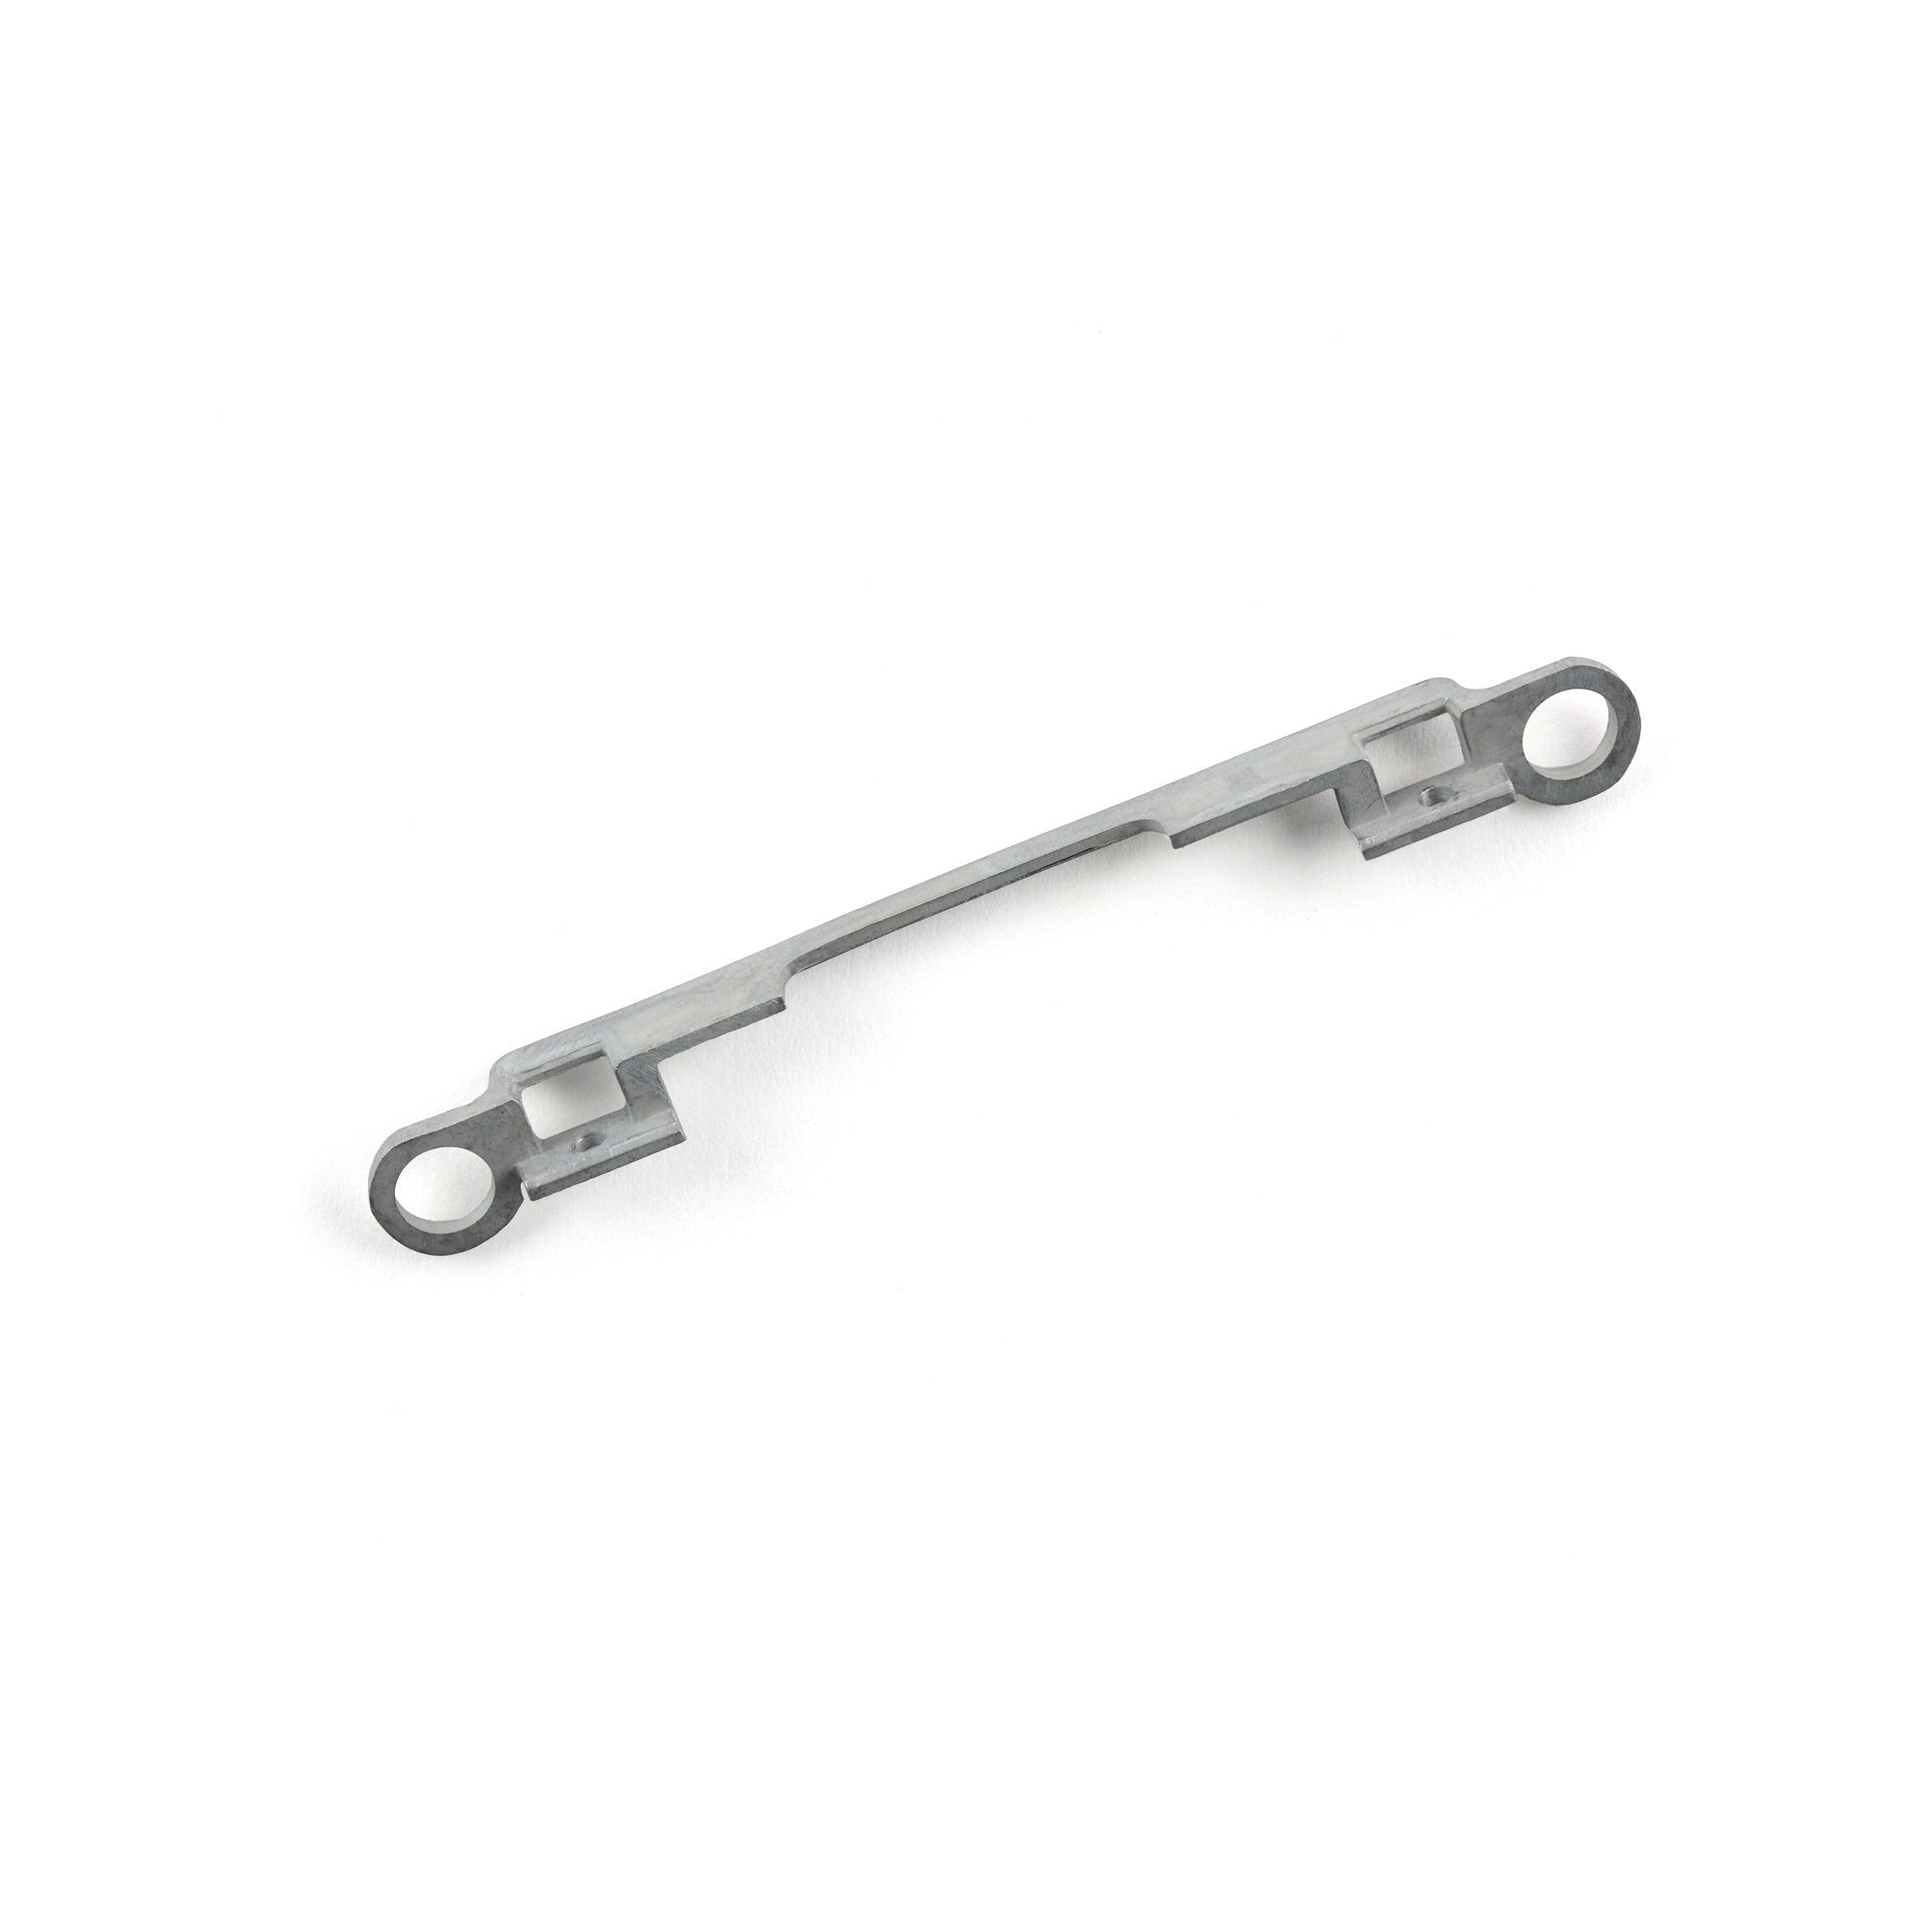 MacBook Pro 15" (Model A1150) Hard Drive Bracket Used Without Hard Drive Screws No Rubber Bumpers